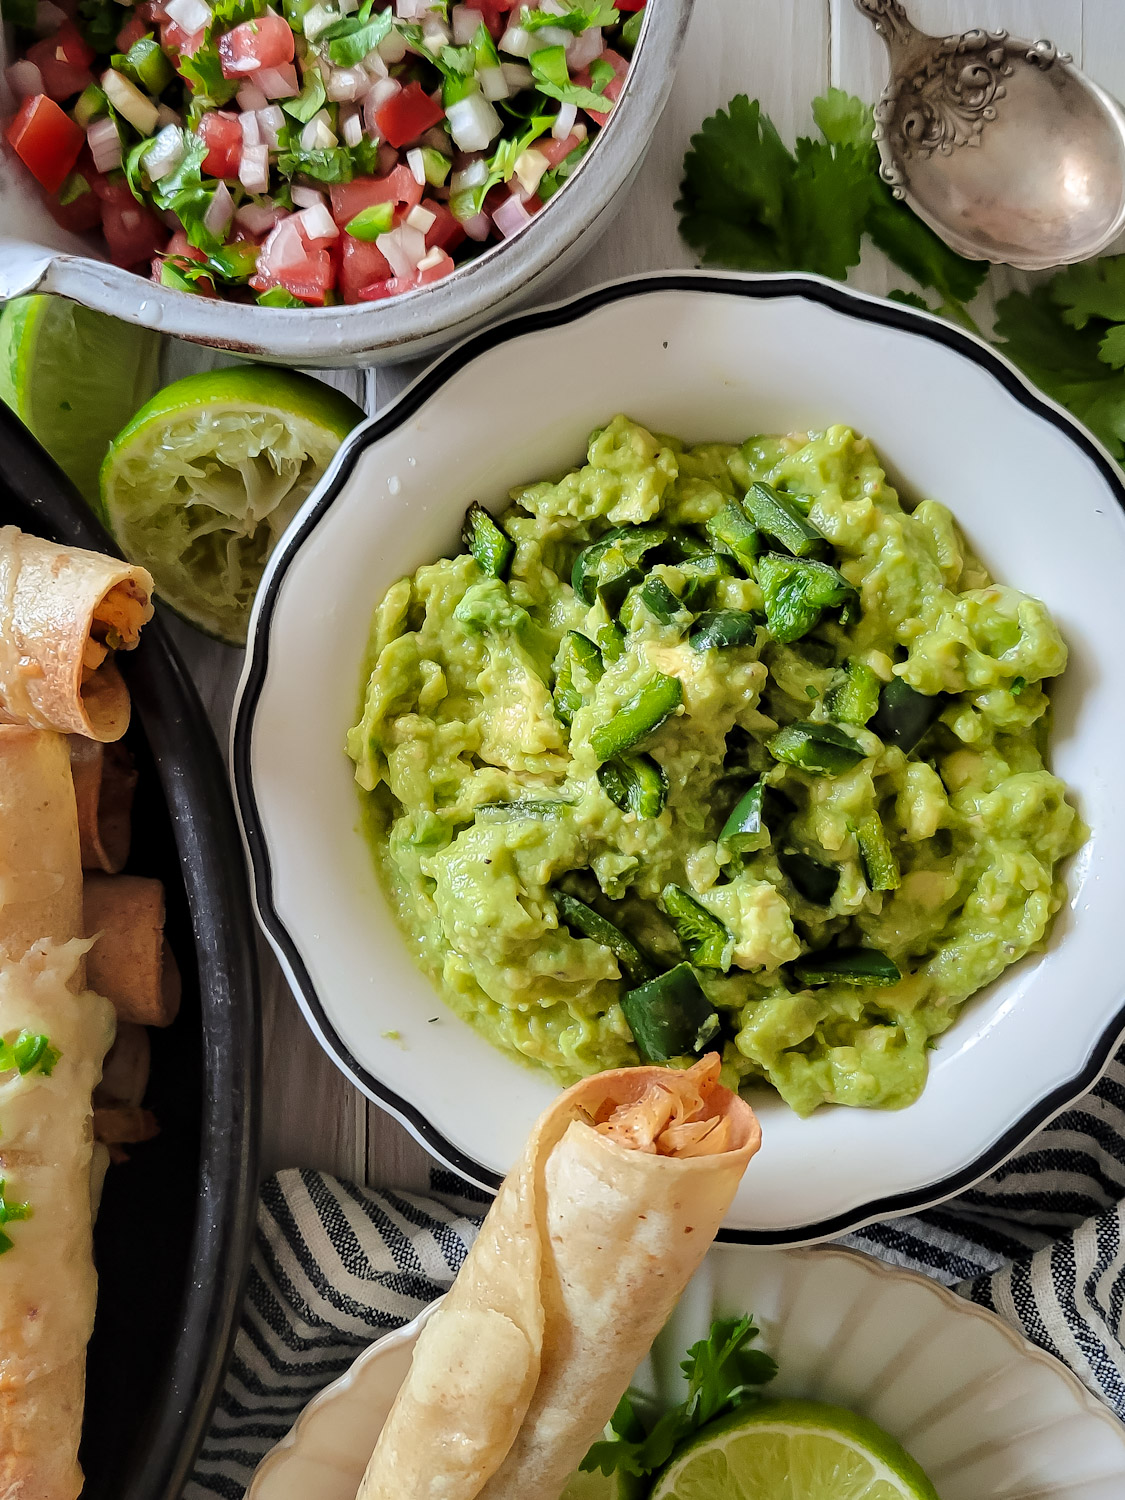 a bowl of classic guacamole with the addition of chopped roasted poblano pepper. Pico de gallo can be seen in the background, and a taquito is sitting on the edge of the bowl.